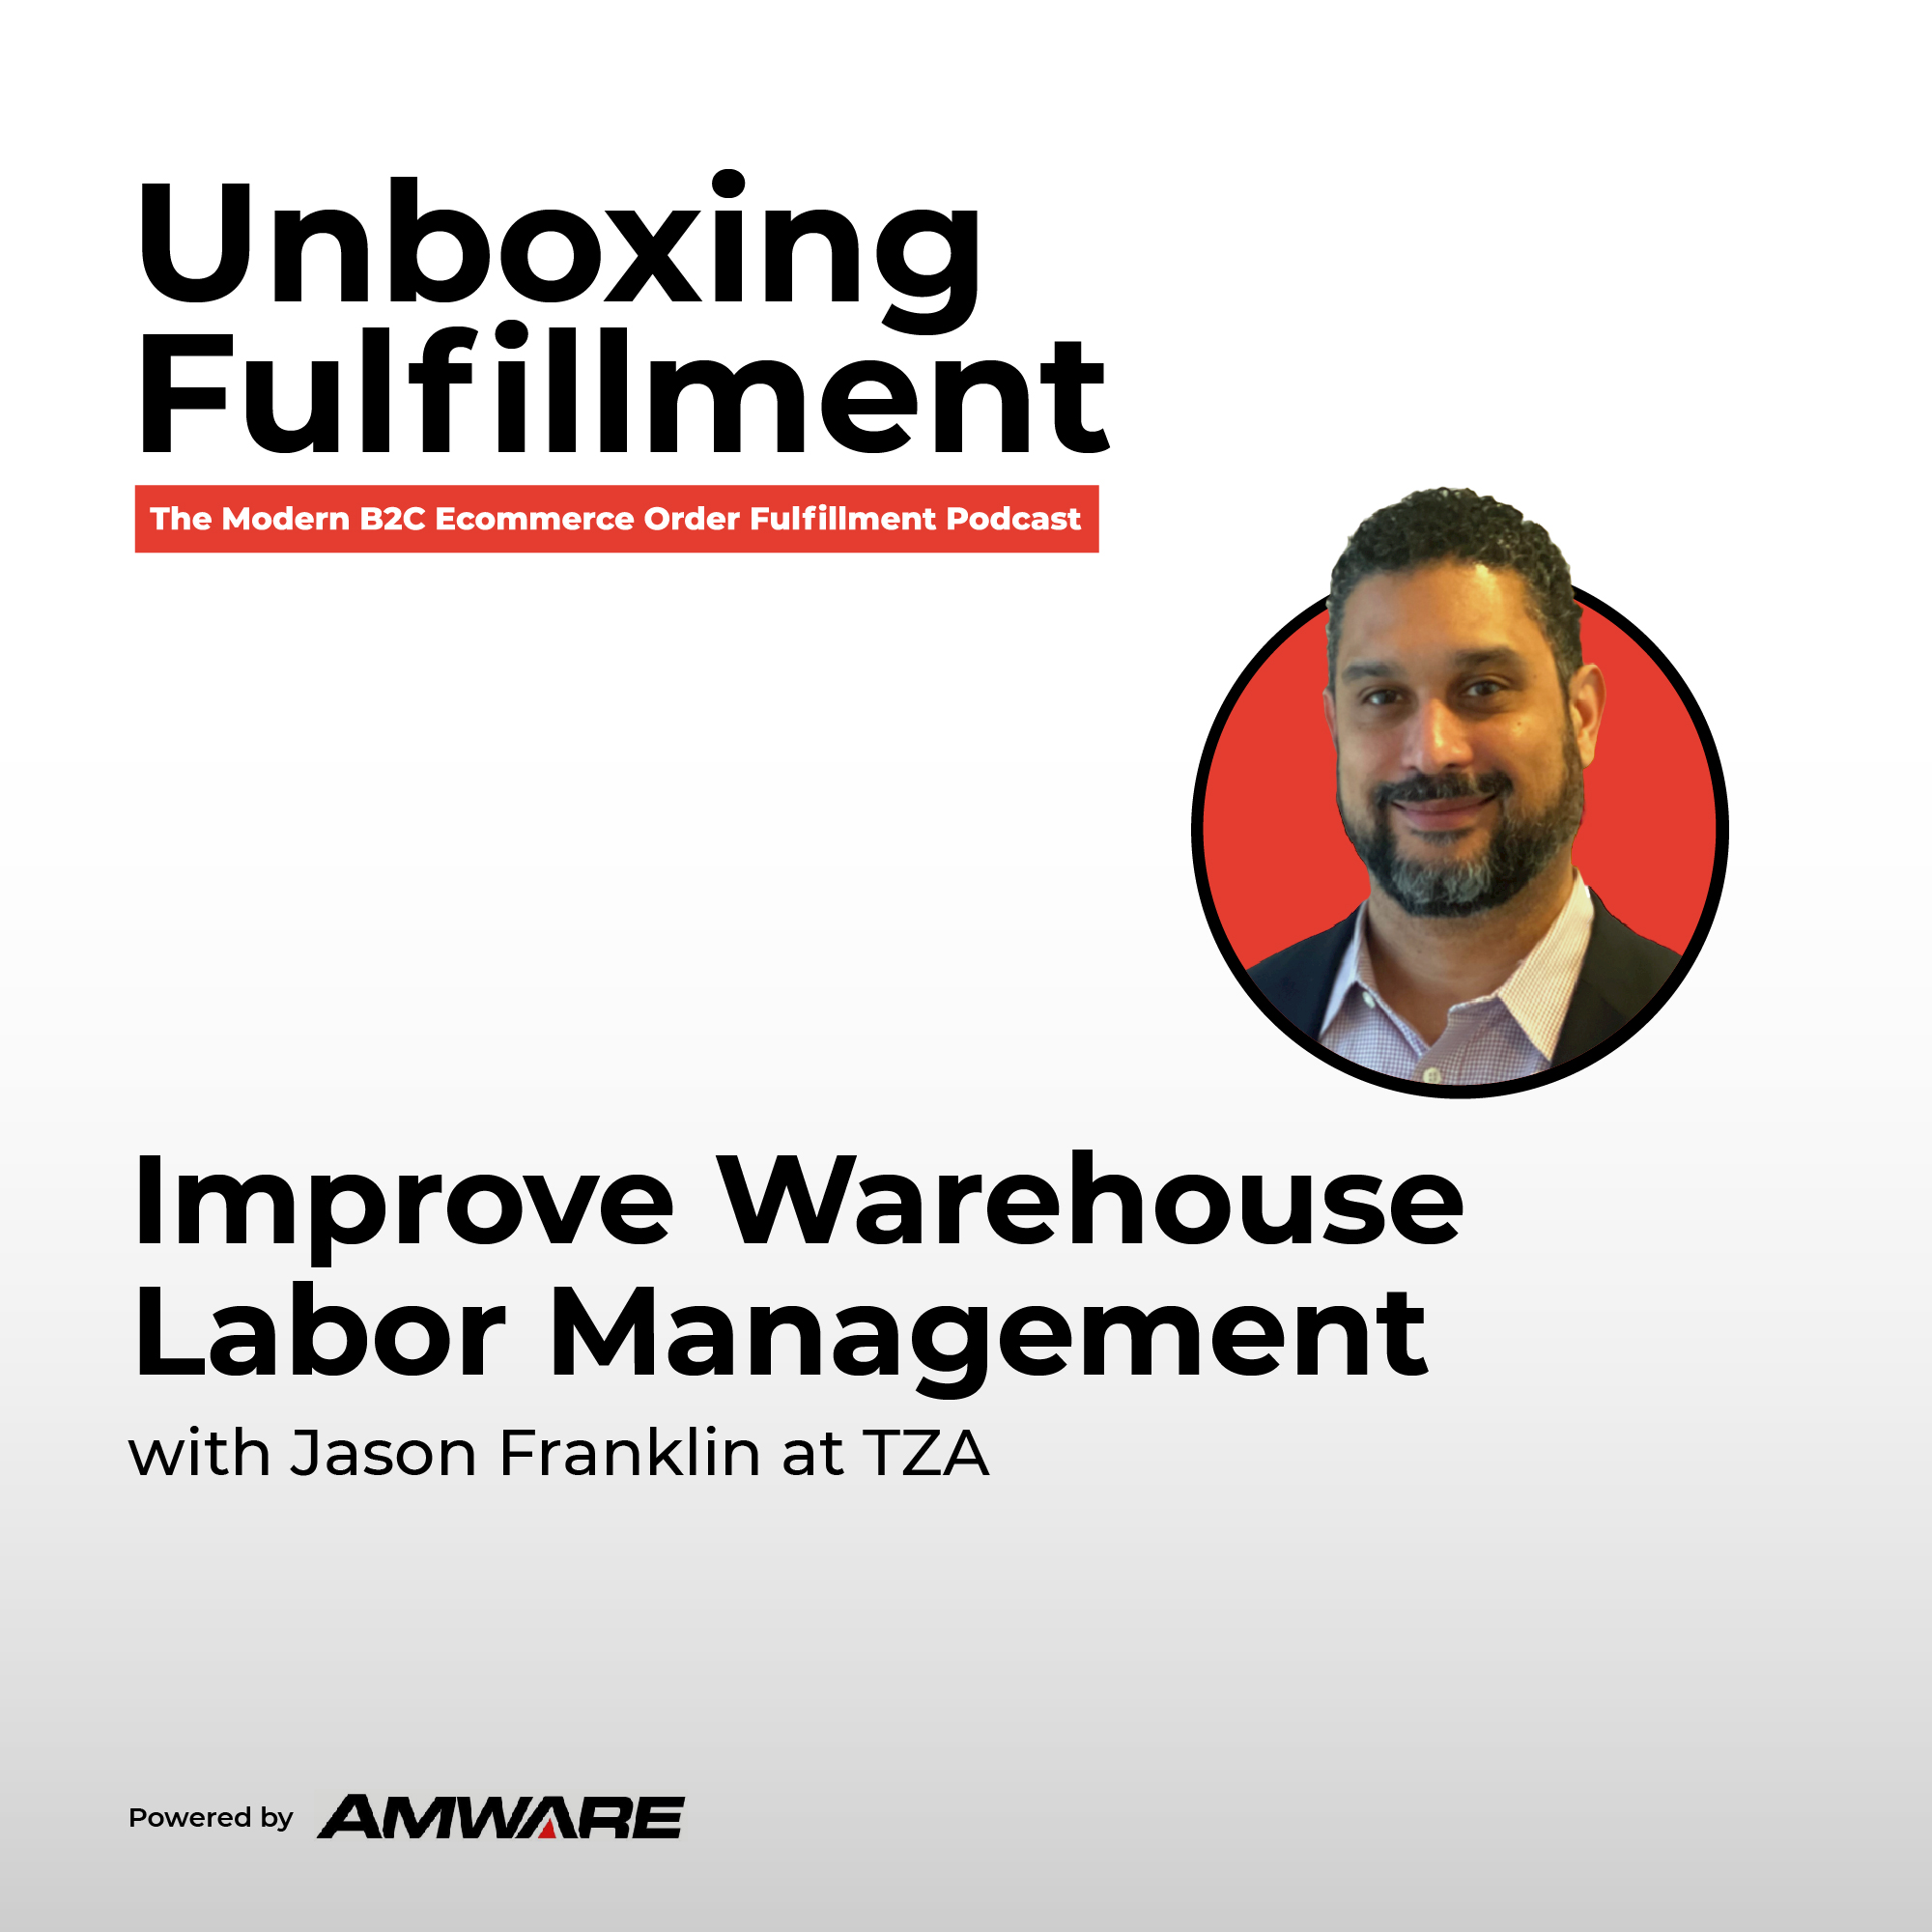 Improve Warehouse Labor Management with Jason Franklin at TZA